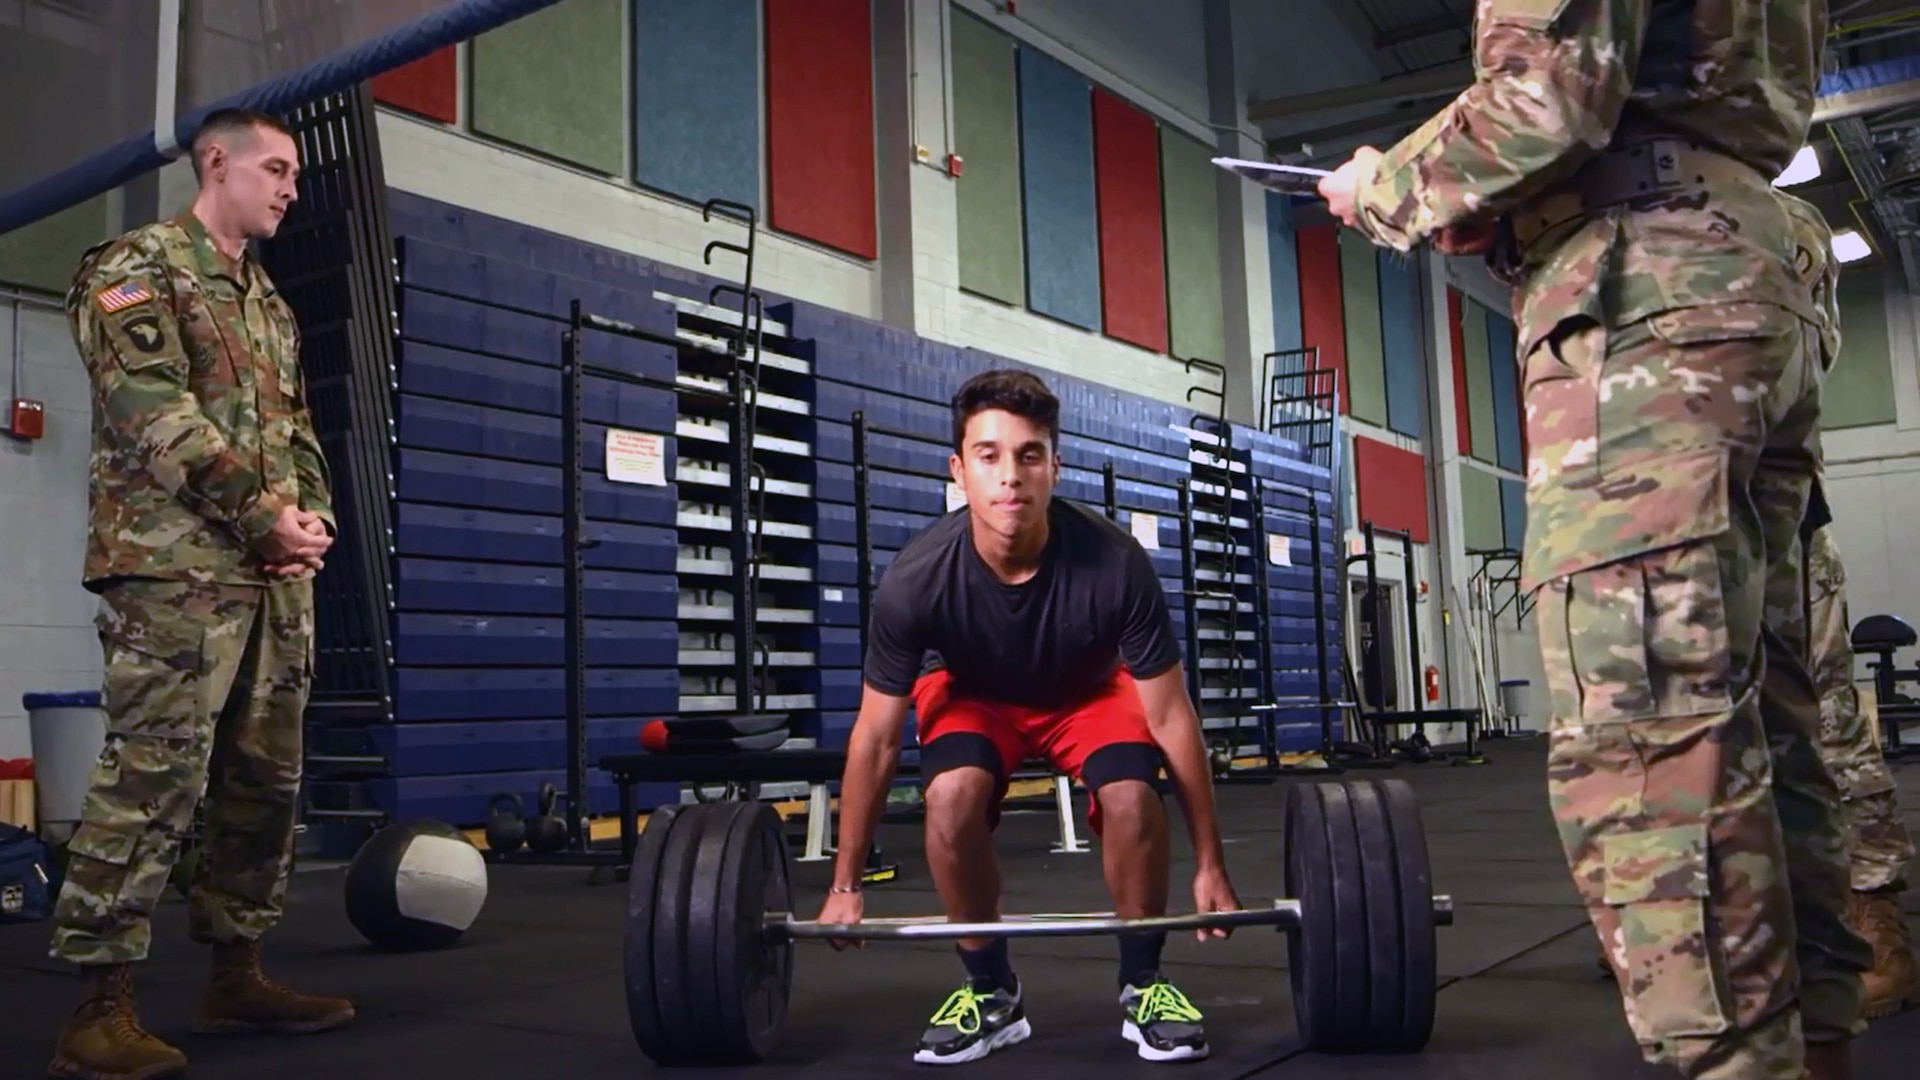 Soldiers administer the strength deadlift event of the Occupational Physical Assessment Test to a potential recruit. Since January 2017, when OPAT was rolled out to recruiting stations, officials believe the test has significantly reduced attrition among trainees and as a result has prevented the Army from wasting millions of training dollars.